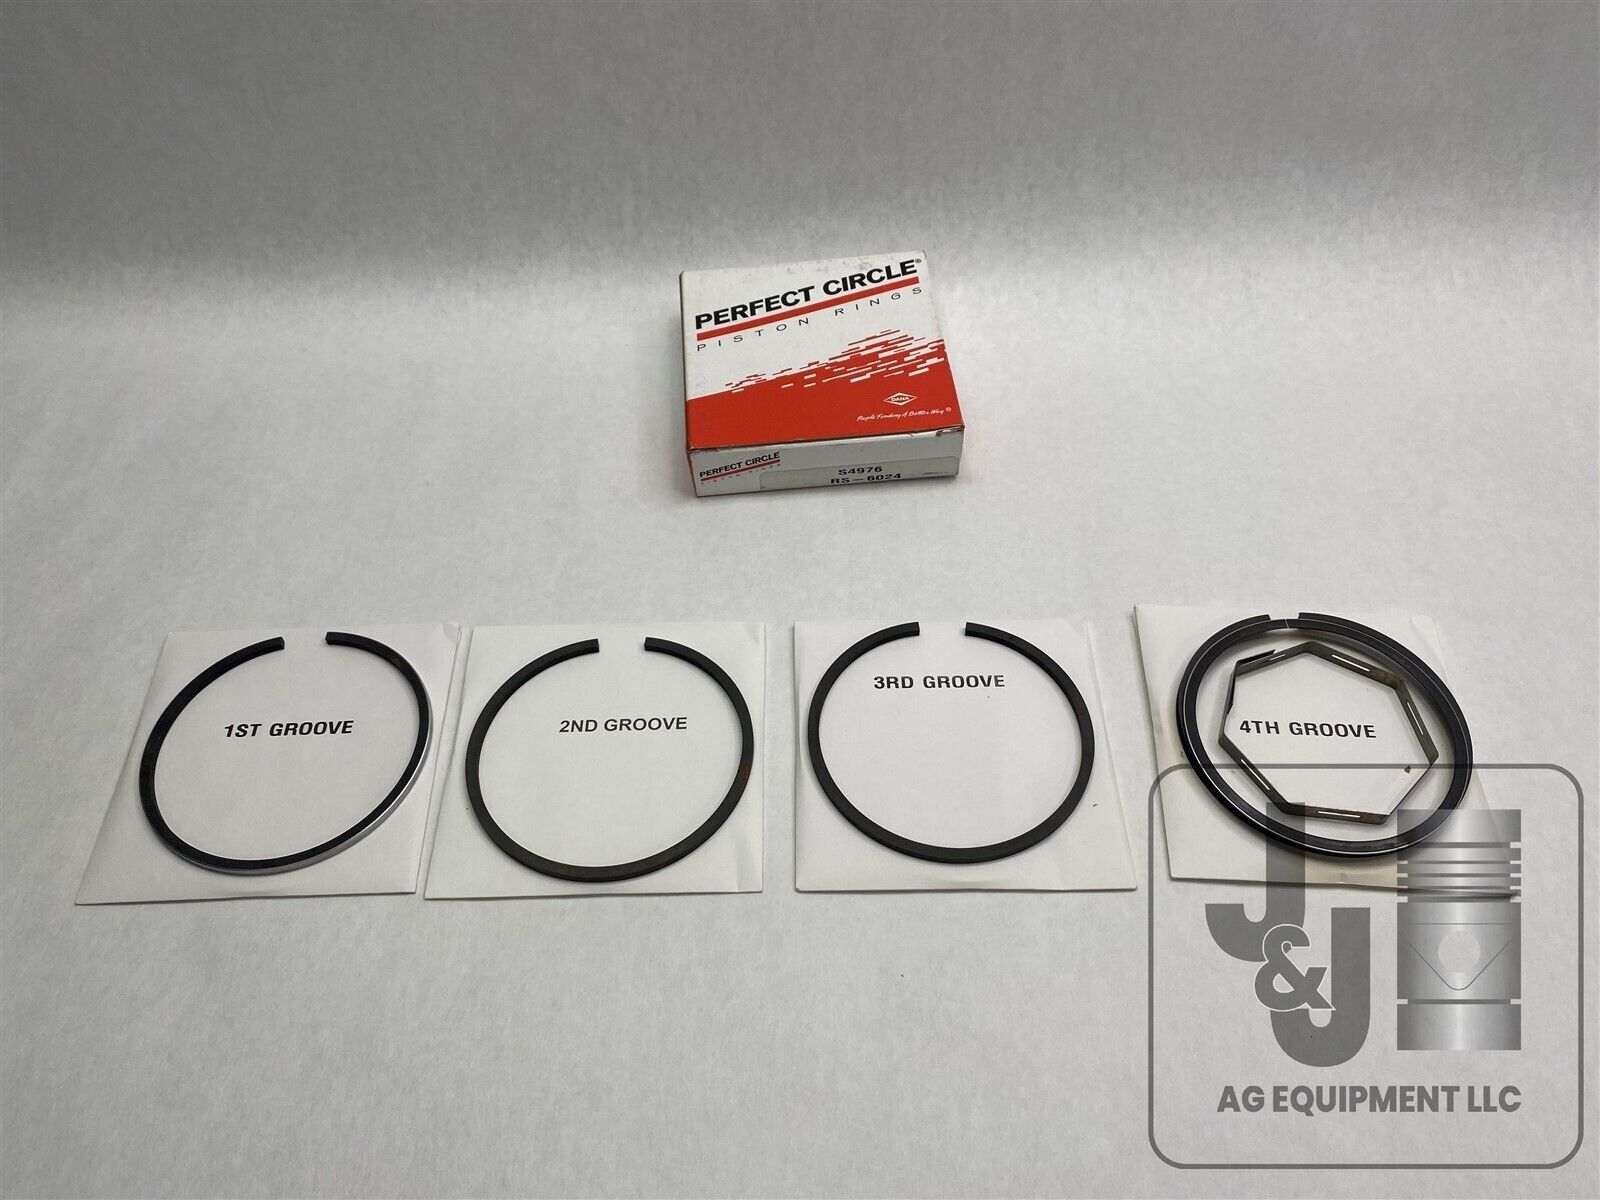 voordat Antagonist belegd broodje PERFECT CIRCLE S4976 RS-6024 PISTON RING SET FITS CASE 430, 445, 470 T